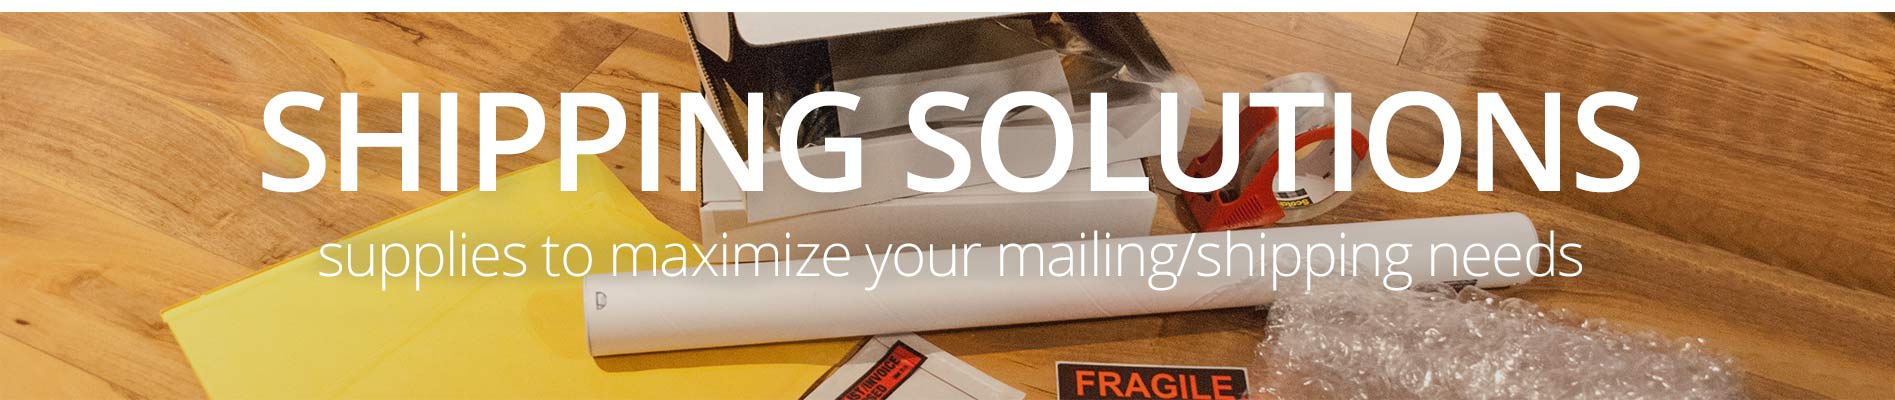 Shipping Solutions - Supplies to maximize your mailing needs